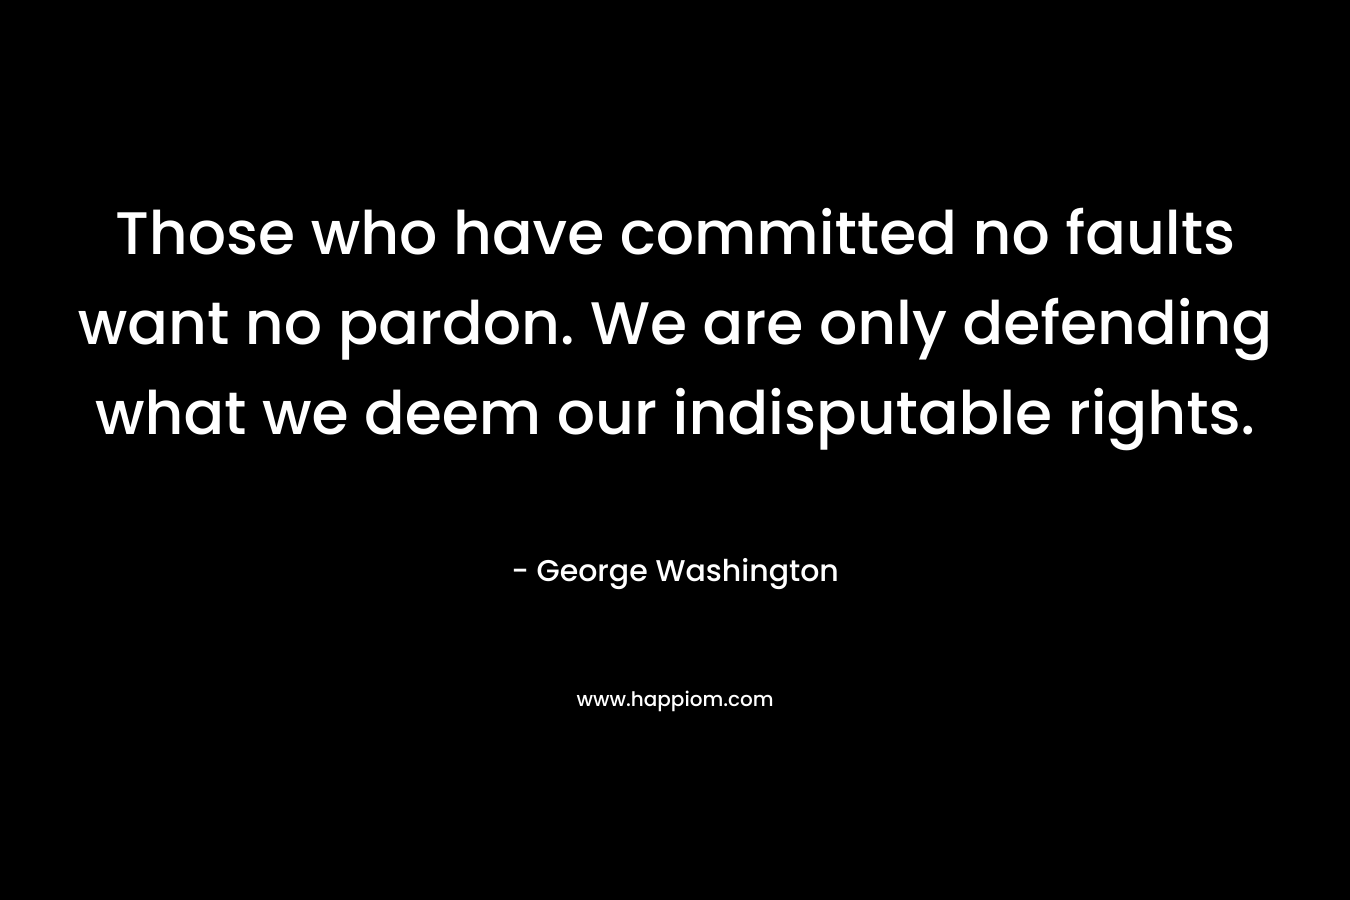 Those who have committed no faults want no pardon. We are only defending what we deem our indisputable rights.